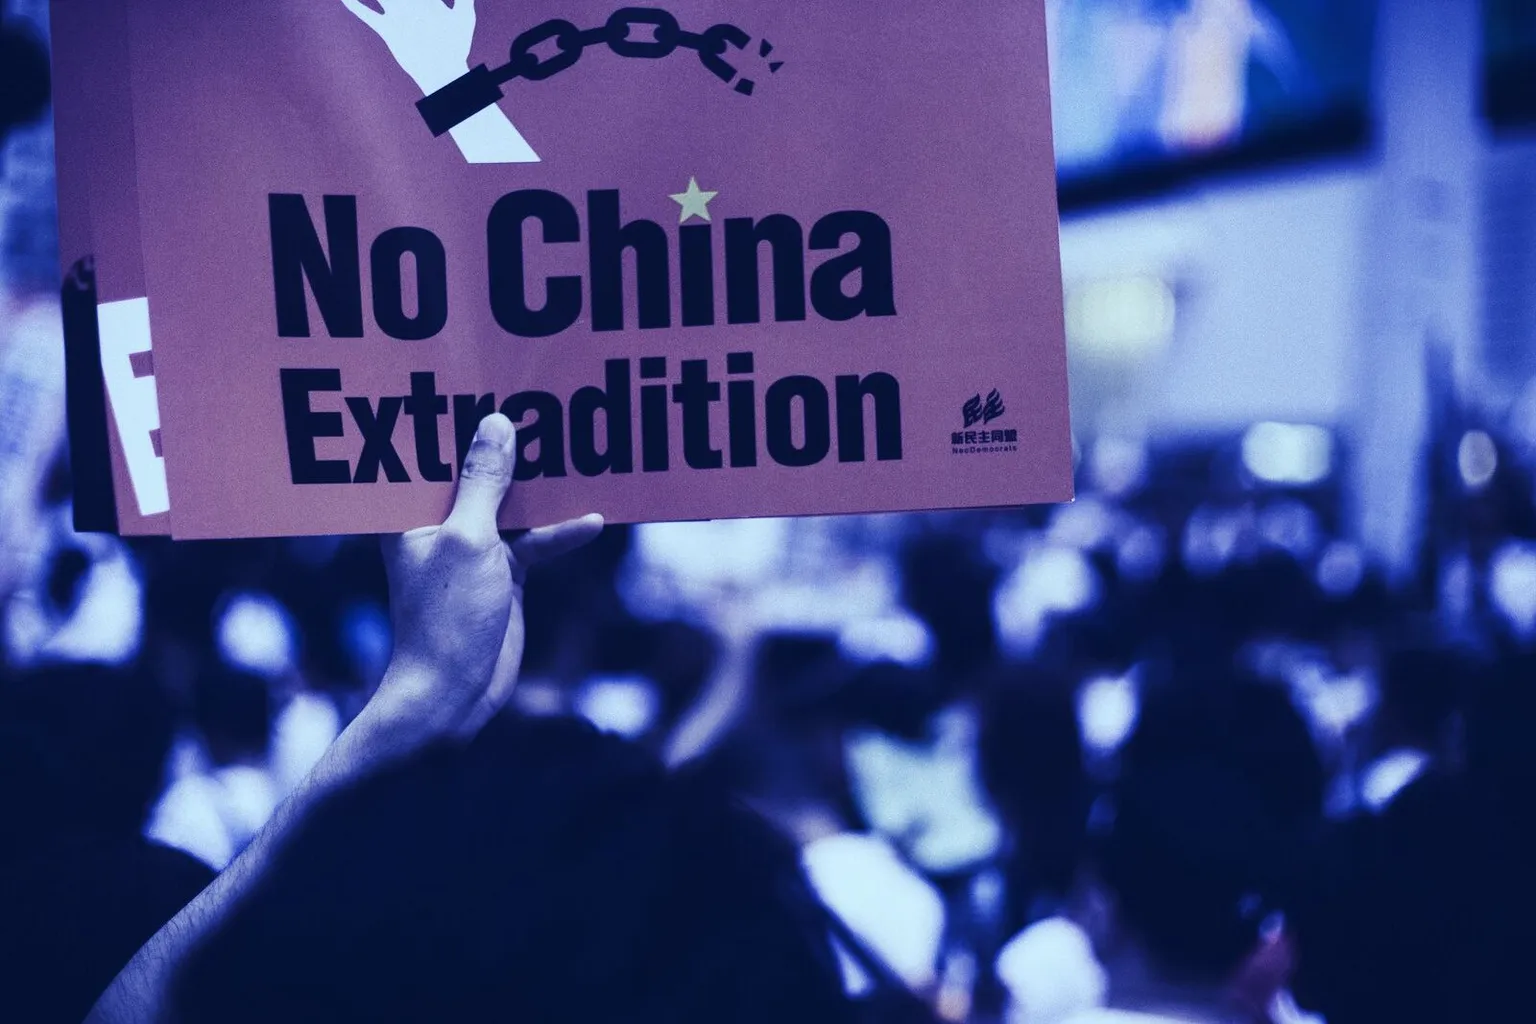 Hong Kong has faced ongoing pro-democracy protests over a controversial new security law (Image: Unsplash)